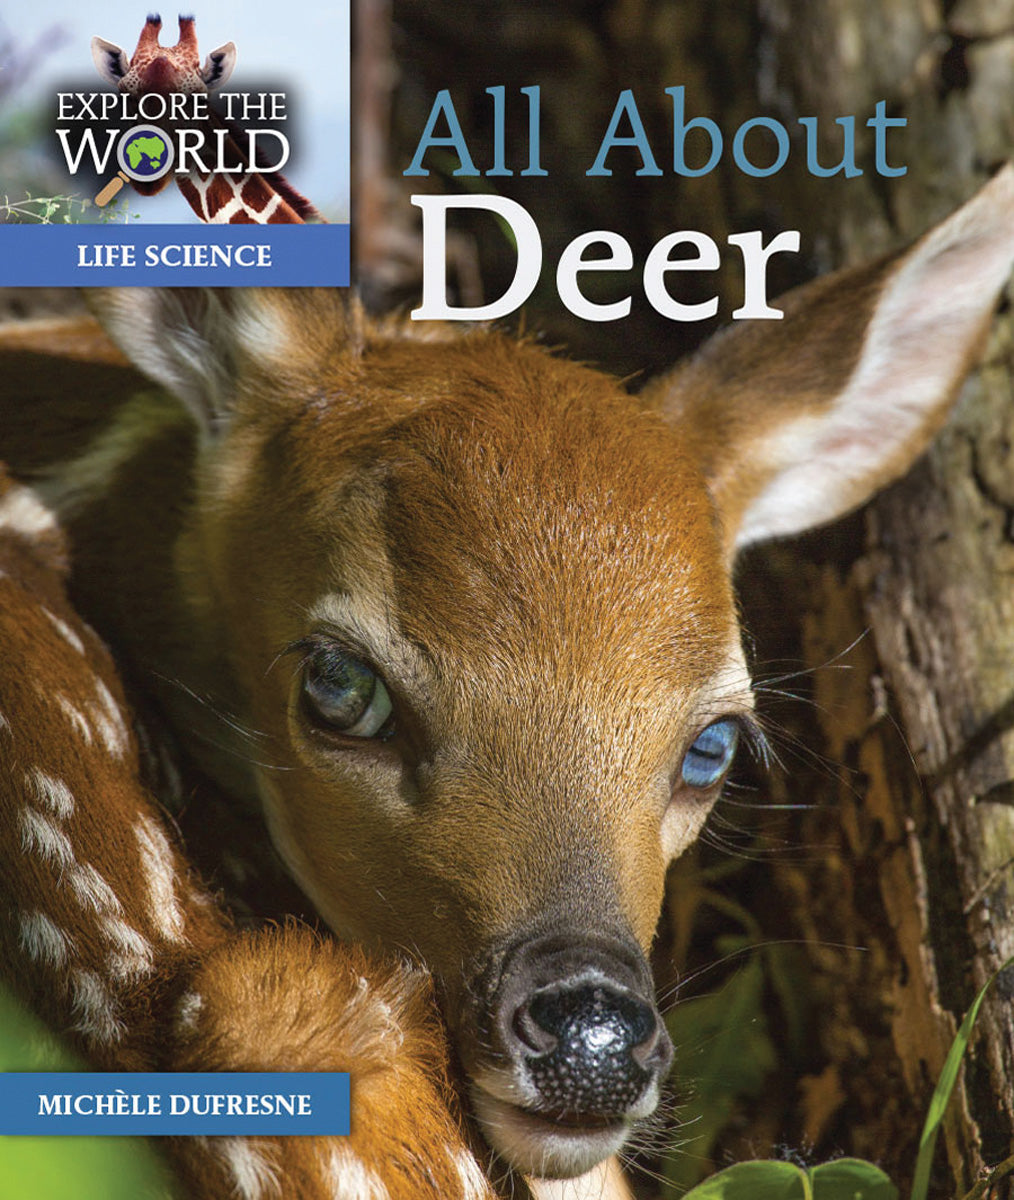 All About Deer – Pioneer Valley Books